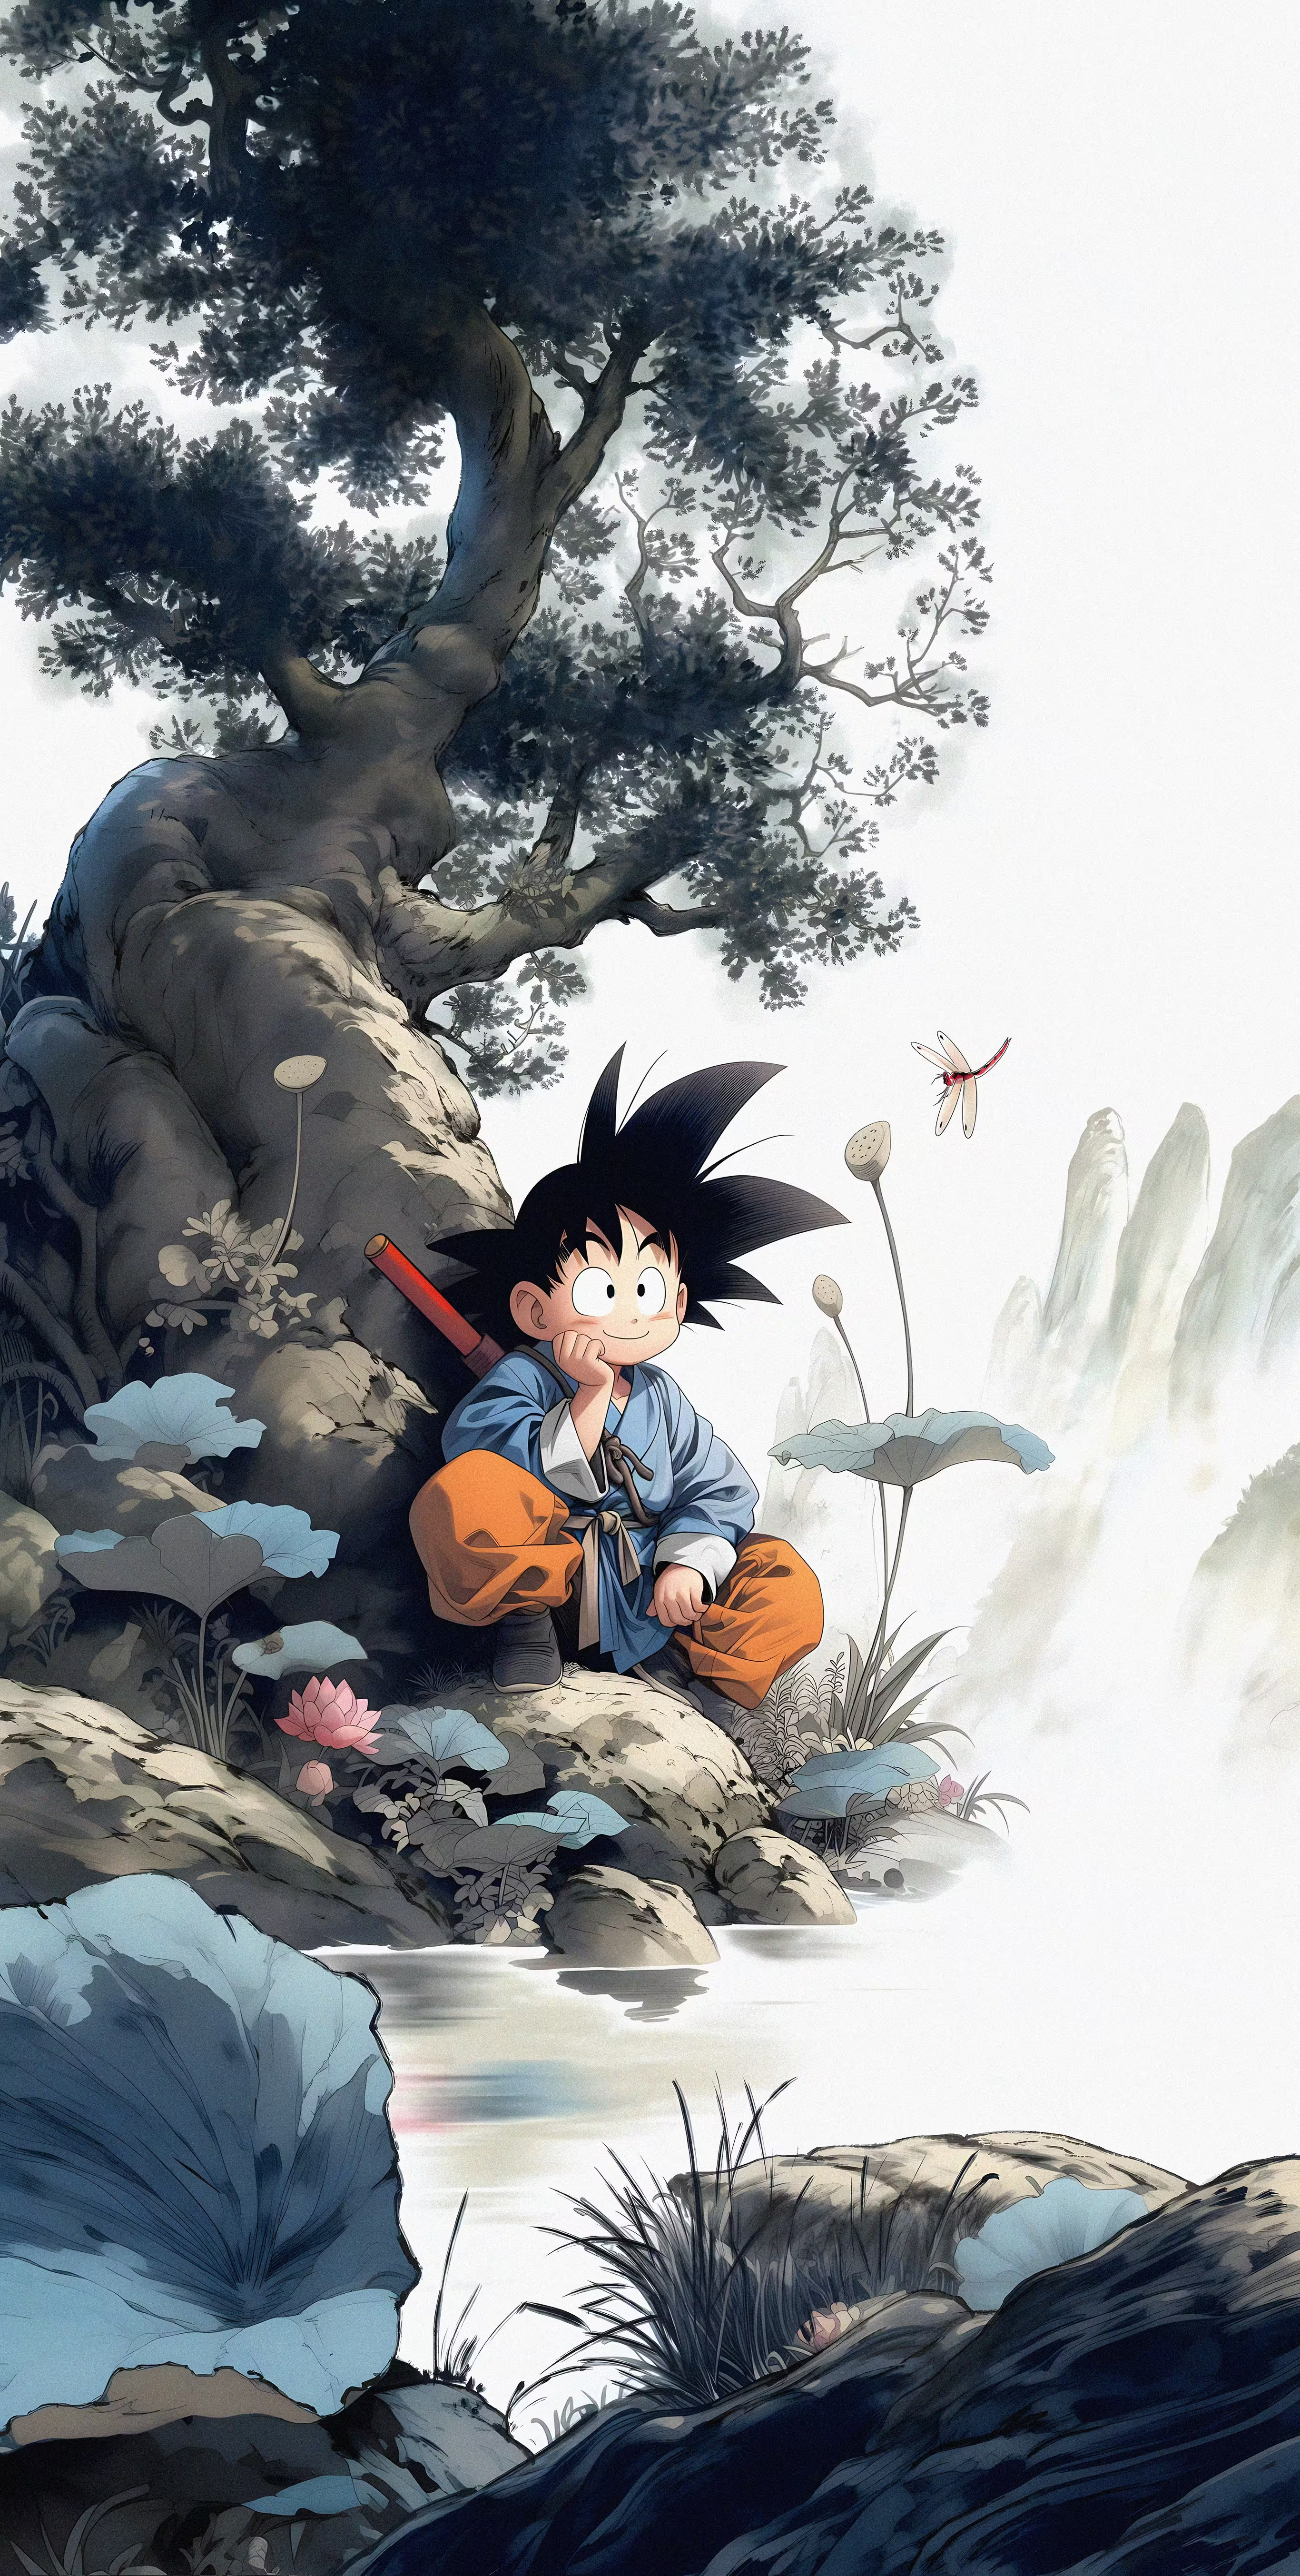 Anime 2732x5412 anime boys Son Goku Dragon Ball outdoors nature dragonflies trees smiling staff portrait display water closed mouth resting head looking away